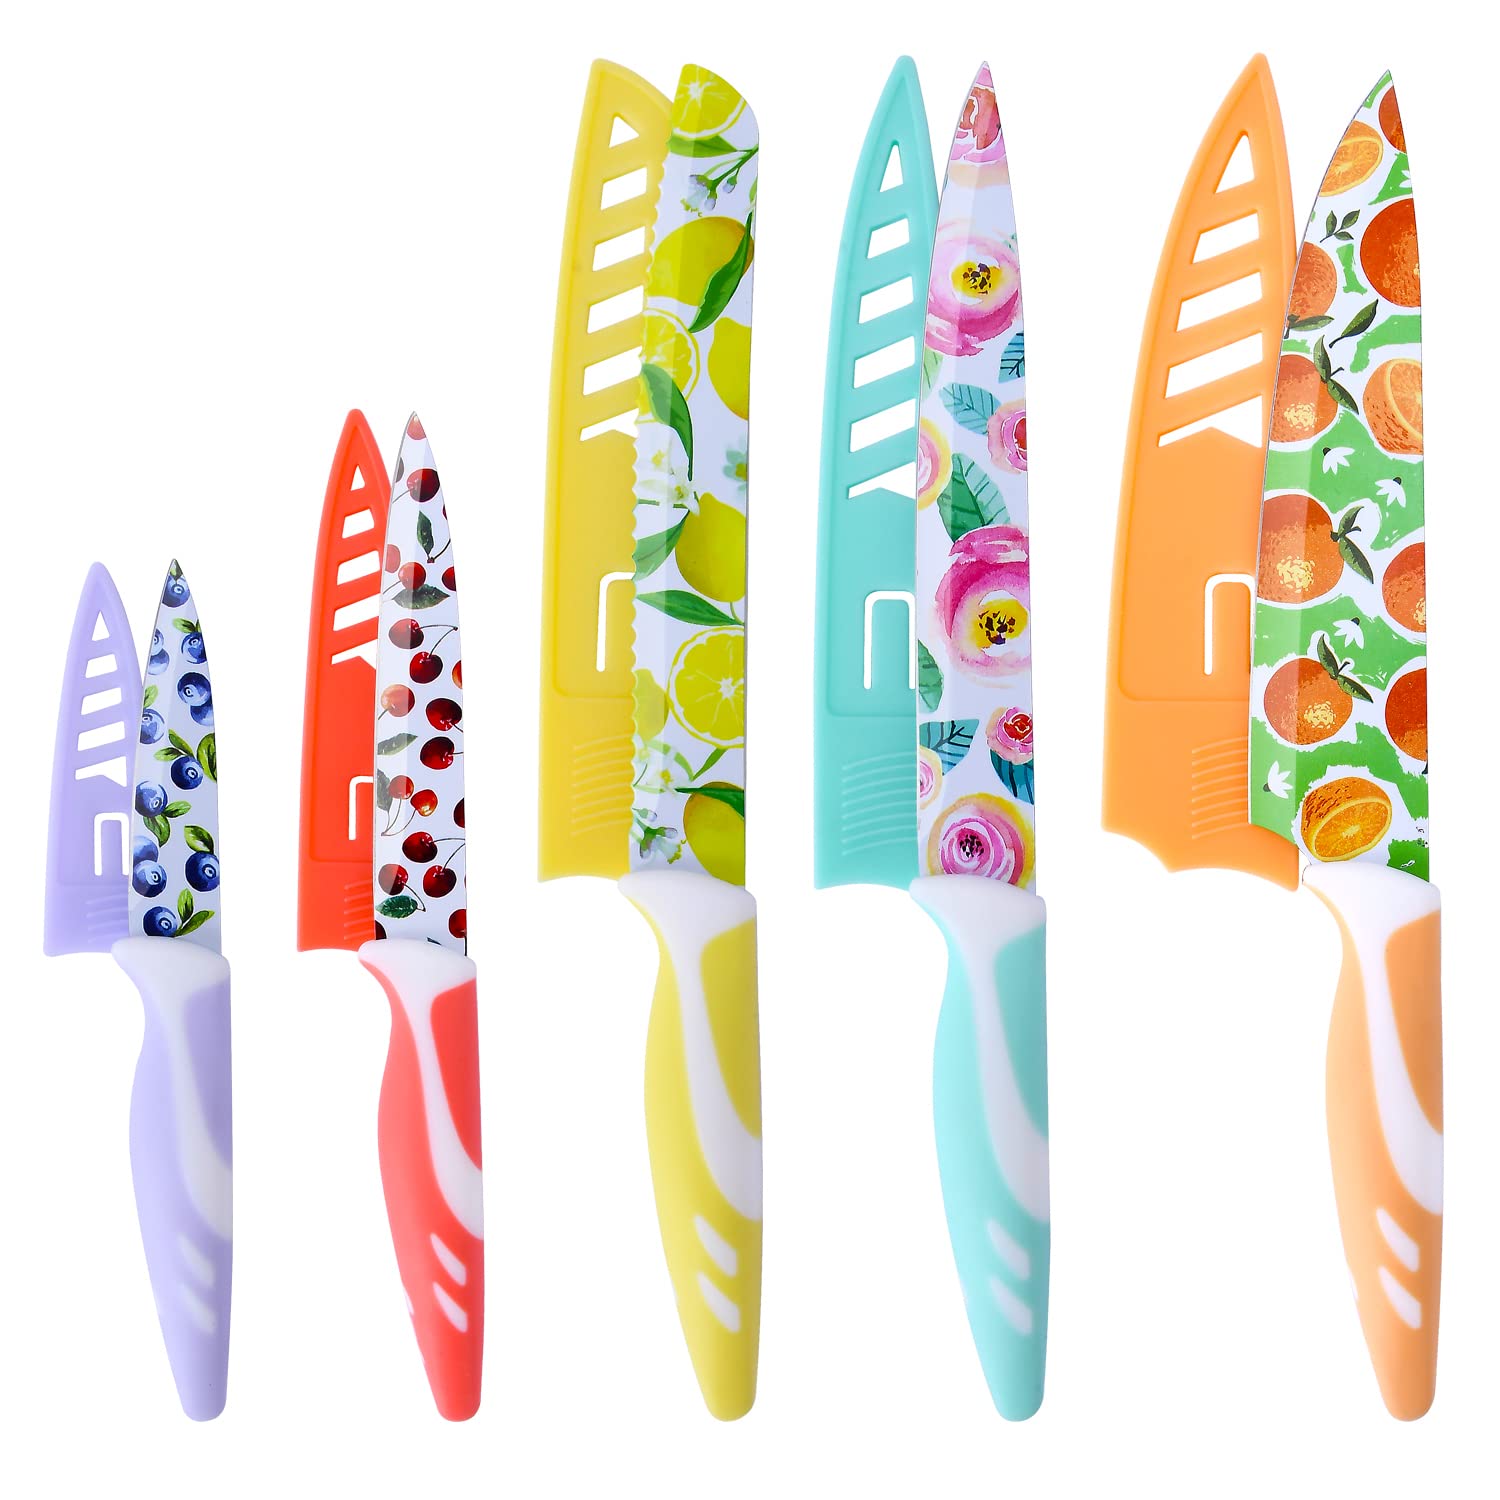 UPTRUST Knife Set, 10-piece Kitchen Knife Set Nonstick Coated with 5 Blade Guard, Multicolored Fruit Knives, Pioneer Woman Knife Set for Kitchen Gifts